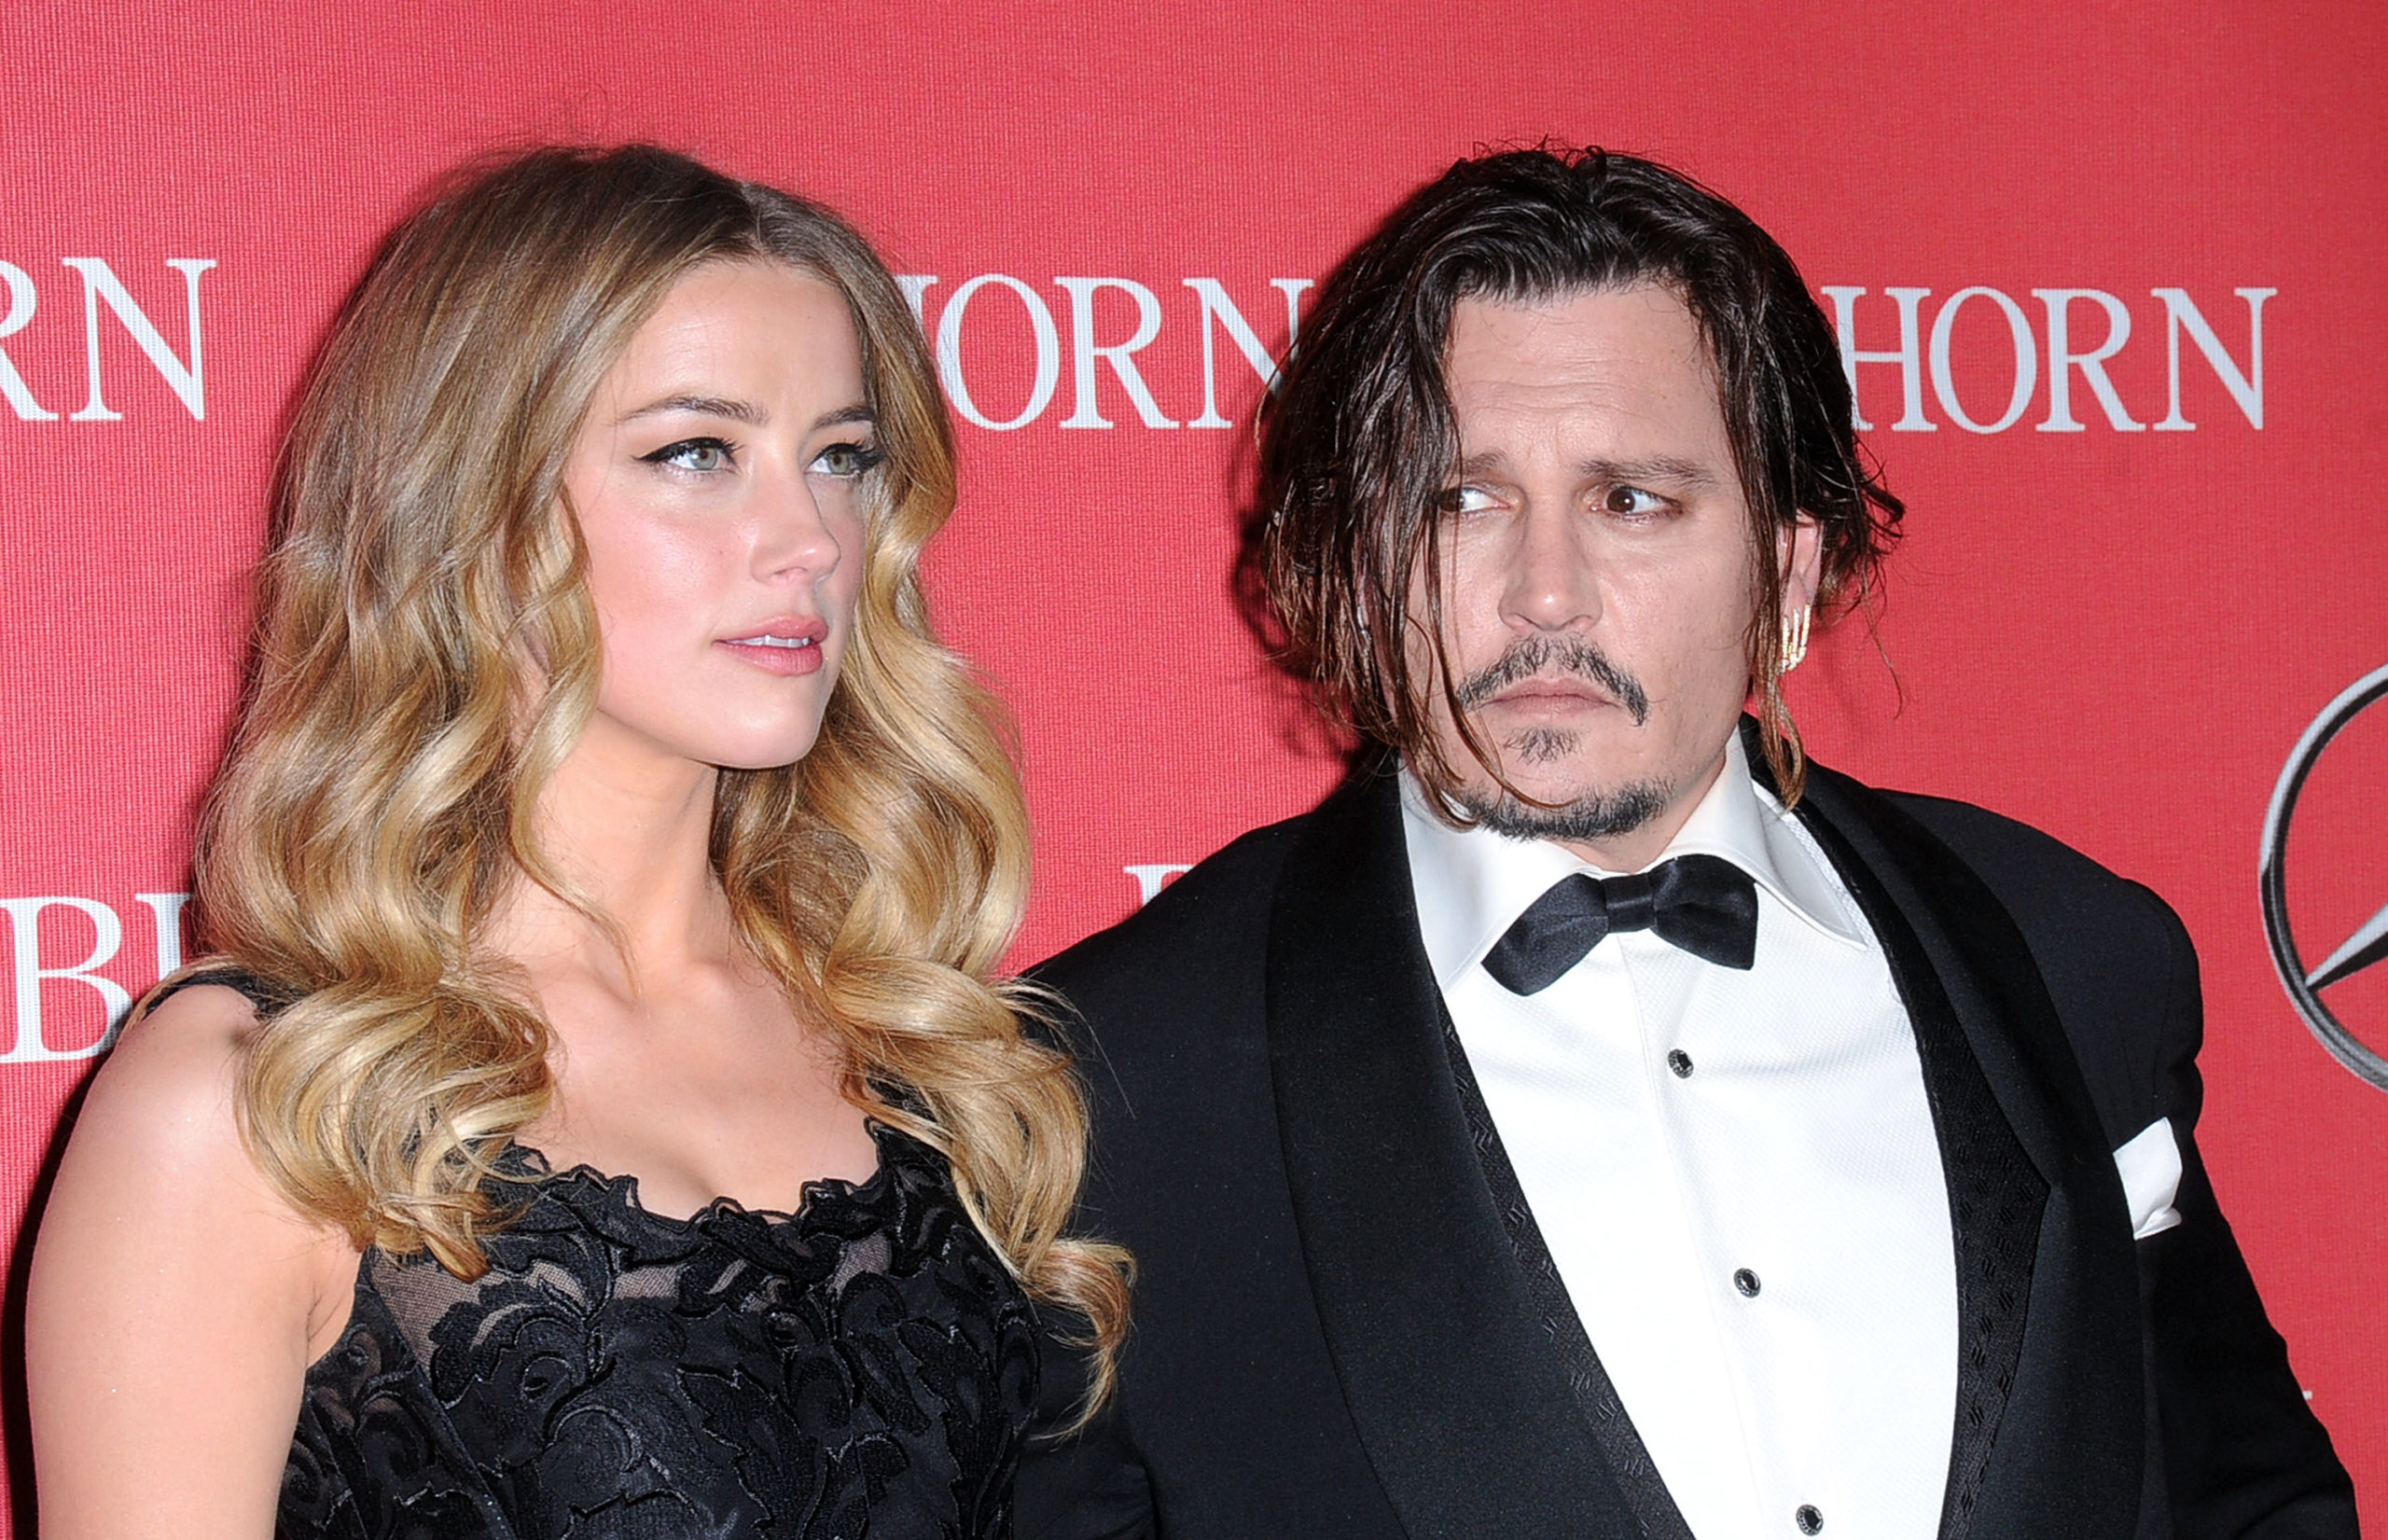 Johnny Depp Paid Homeless Man $425 & 3 Tacos After Amber Heard Threw Phone Over A Balcony, Amber Heard's $100M Libel Lawsuit Against Johnny Depp Moving Forward